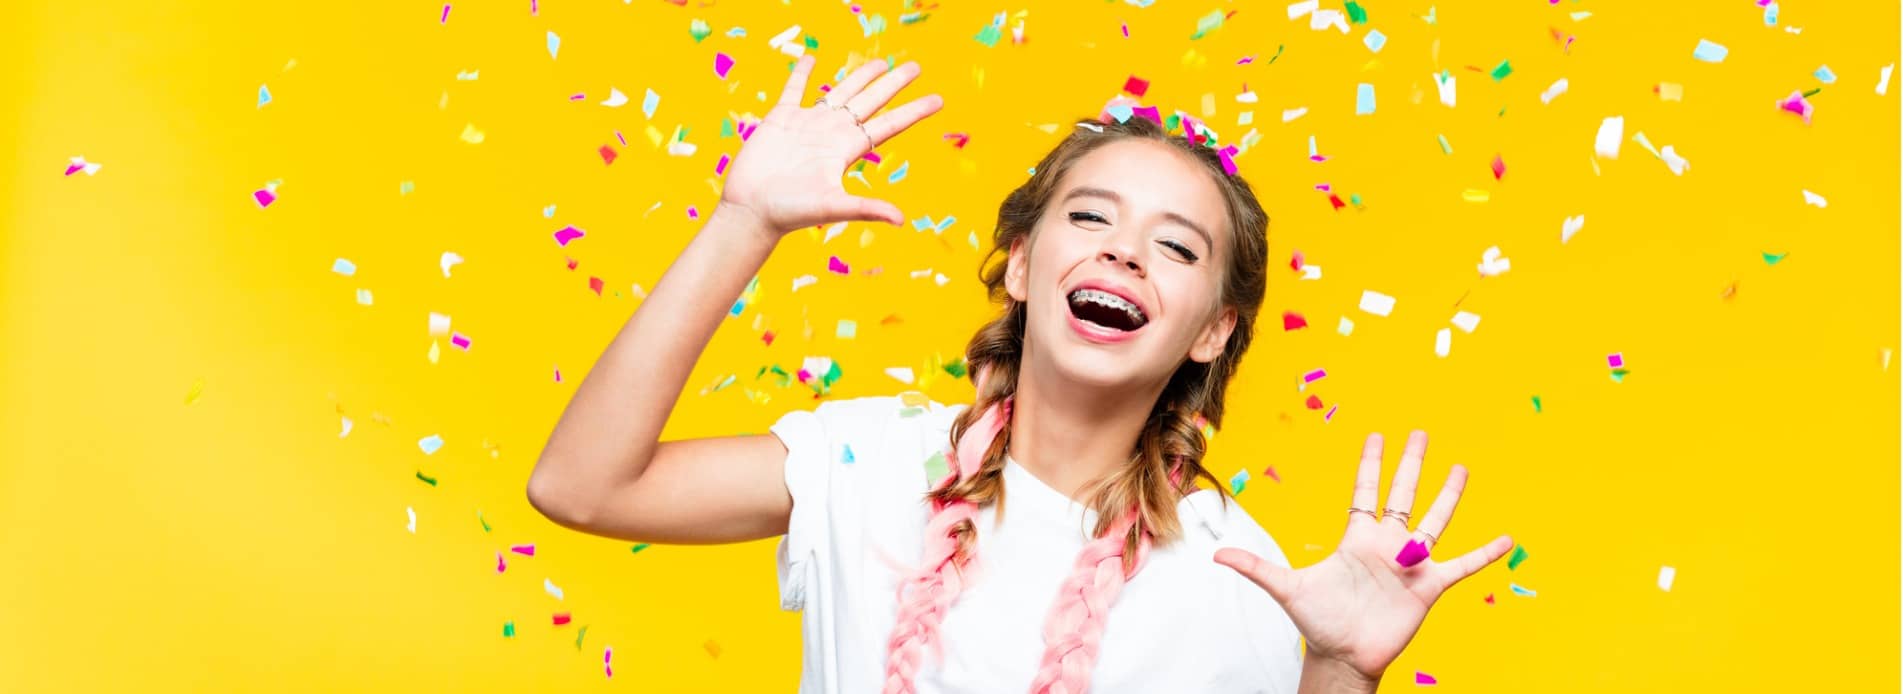 portrait-of-excited-teenage-girl-among-colorful-confetti-picture-id1220419627-min